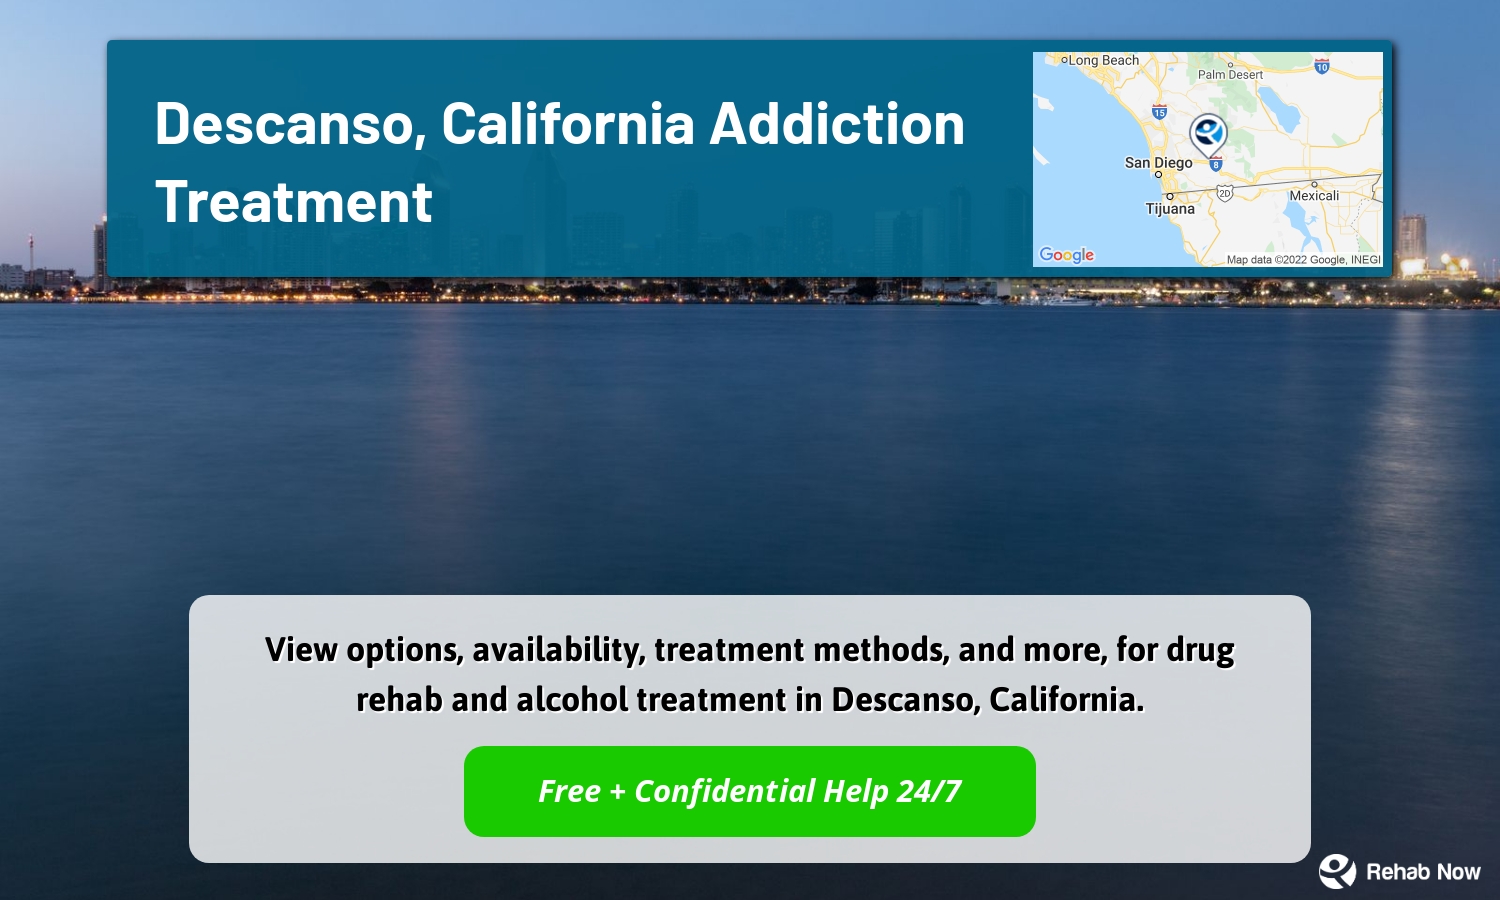 View options, availability, treatment methods, and more, for drug rehab and alcohol treatment in Descanso, California.